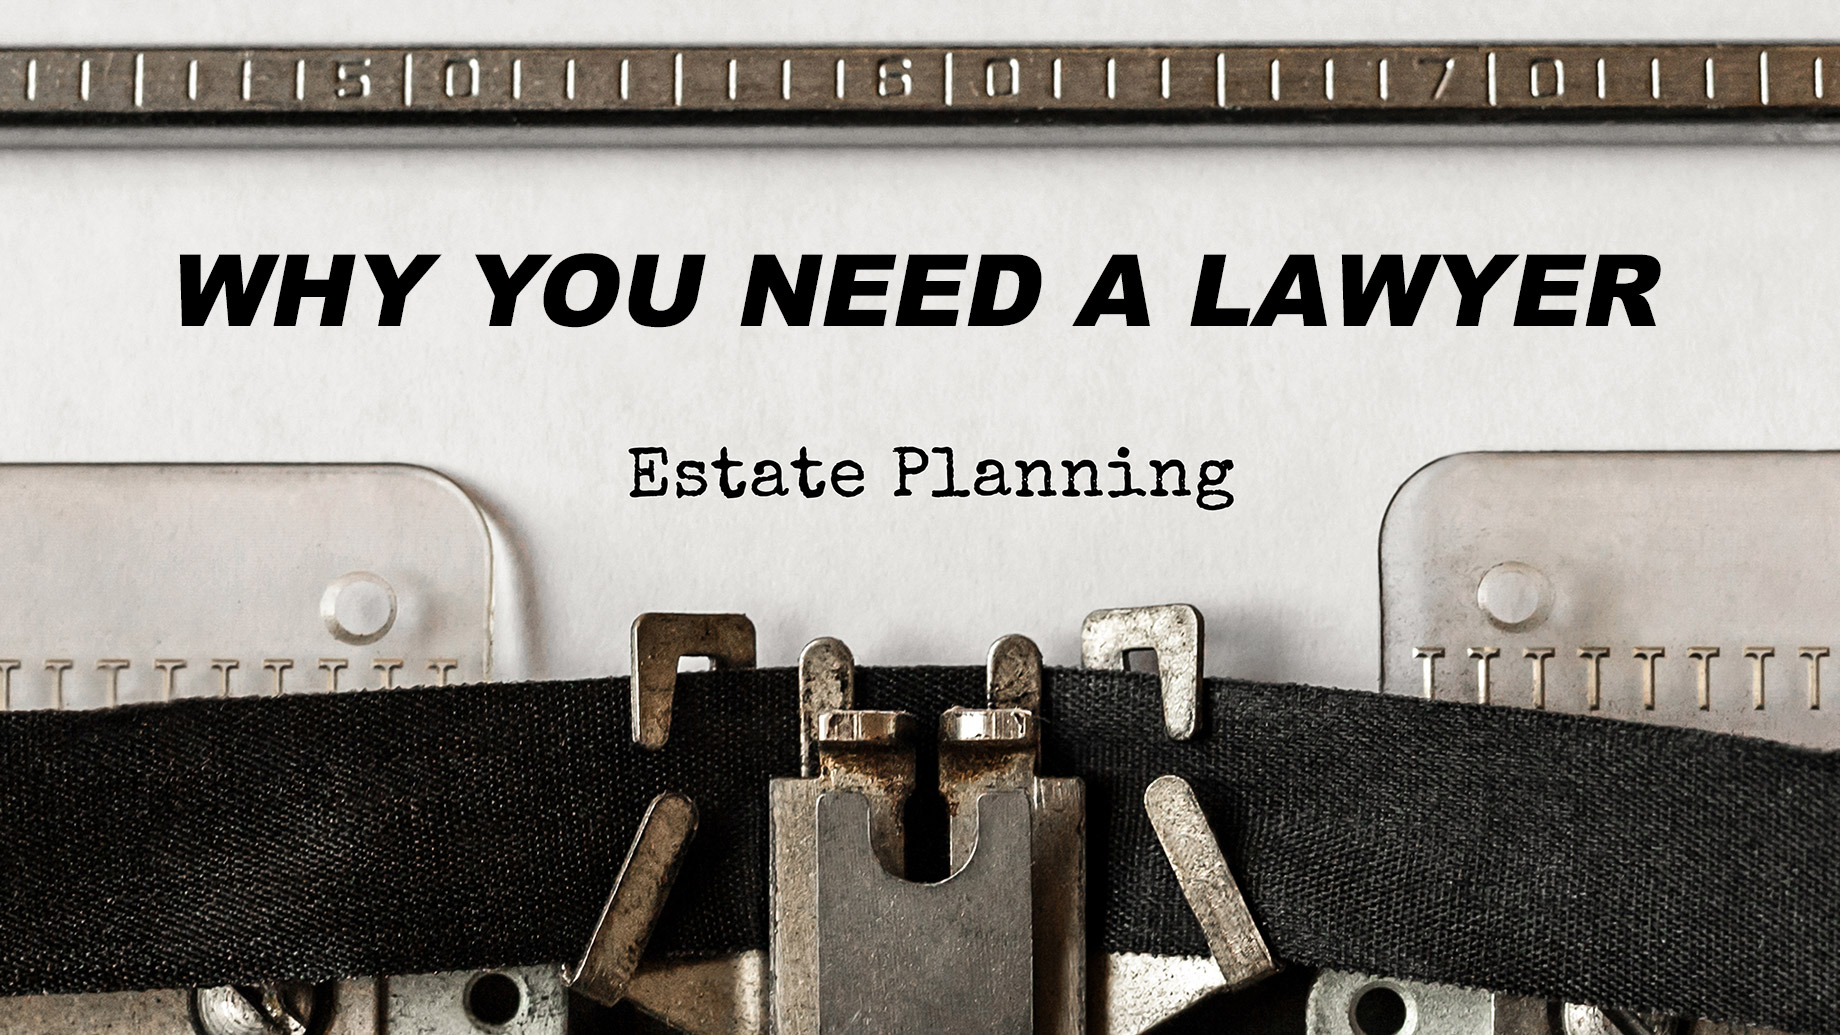 Why You Need A Lawyer For Estate Planning